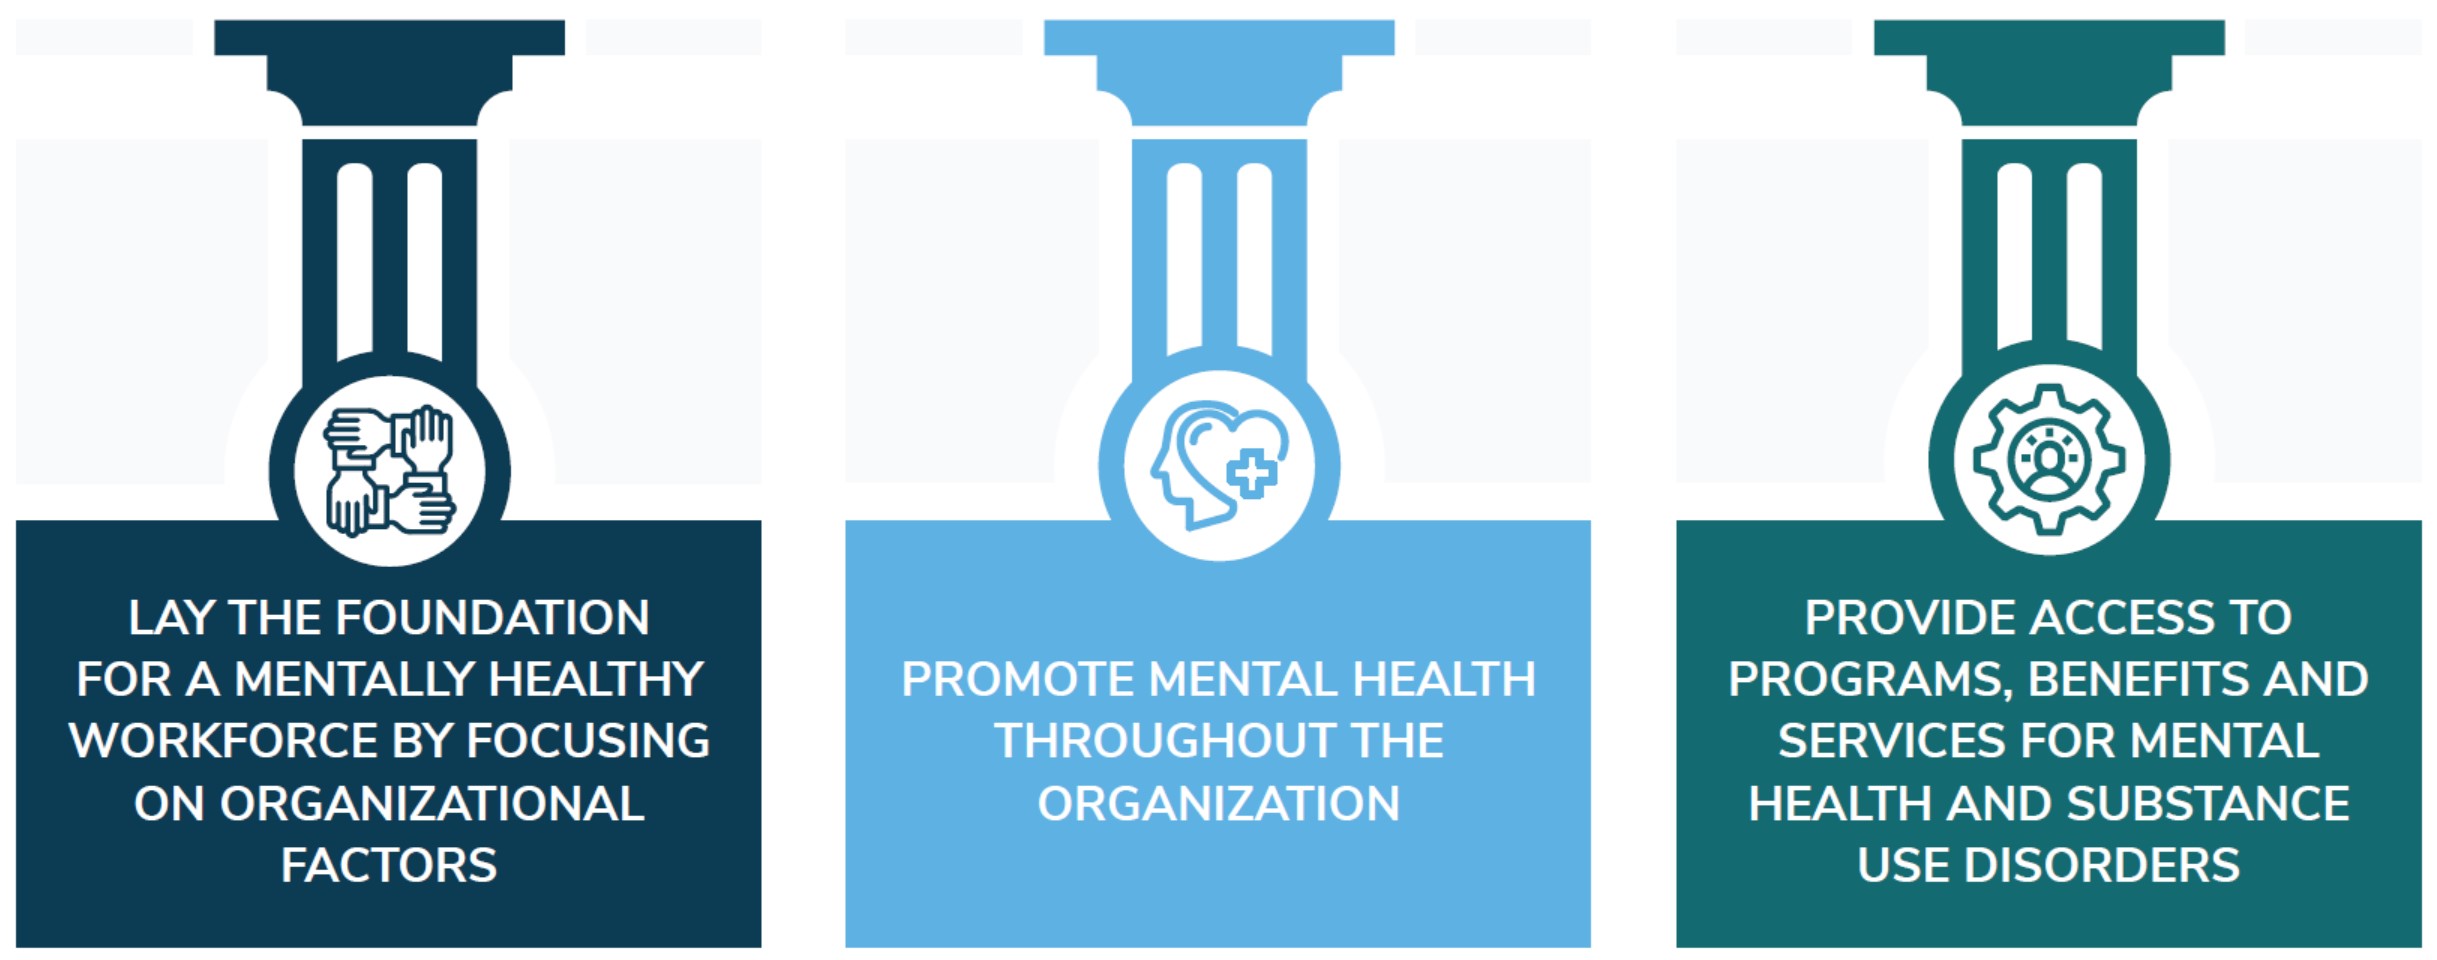 LAY THE FOUNDATION FOR A MENTALLY HEALTHY WORKFORCE BY FOCUSING ON ORGANIZATIONAL FACTORS; PROMOTE MENTAL HEALTH THROUGHOUT THE ORGANIZATION; PROVIDE ACCESS TO PROGRAMS, BENEFITS AND SERVICES FOR MENTAL HEALTH AND SUBSTANCE USE DISORDERS